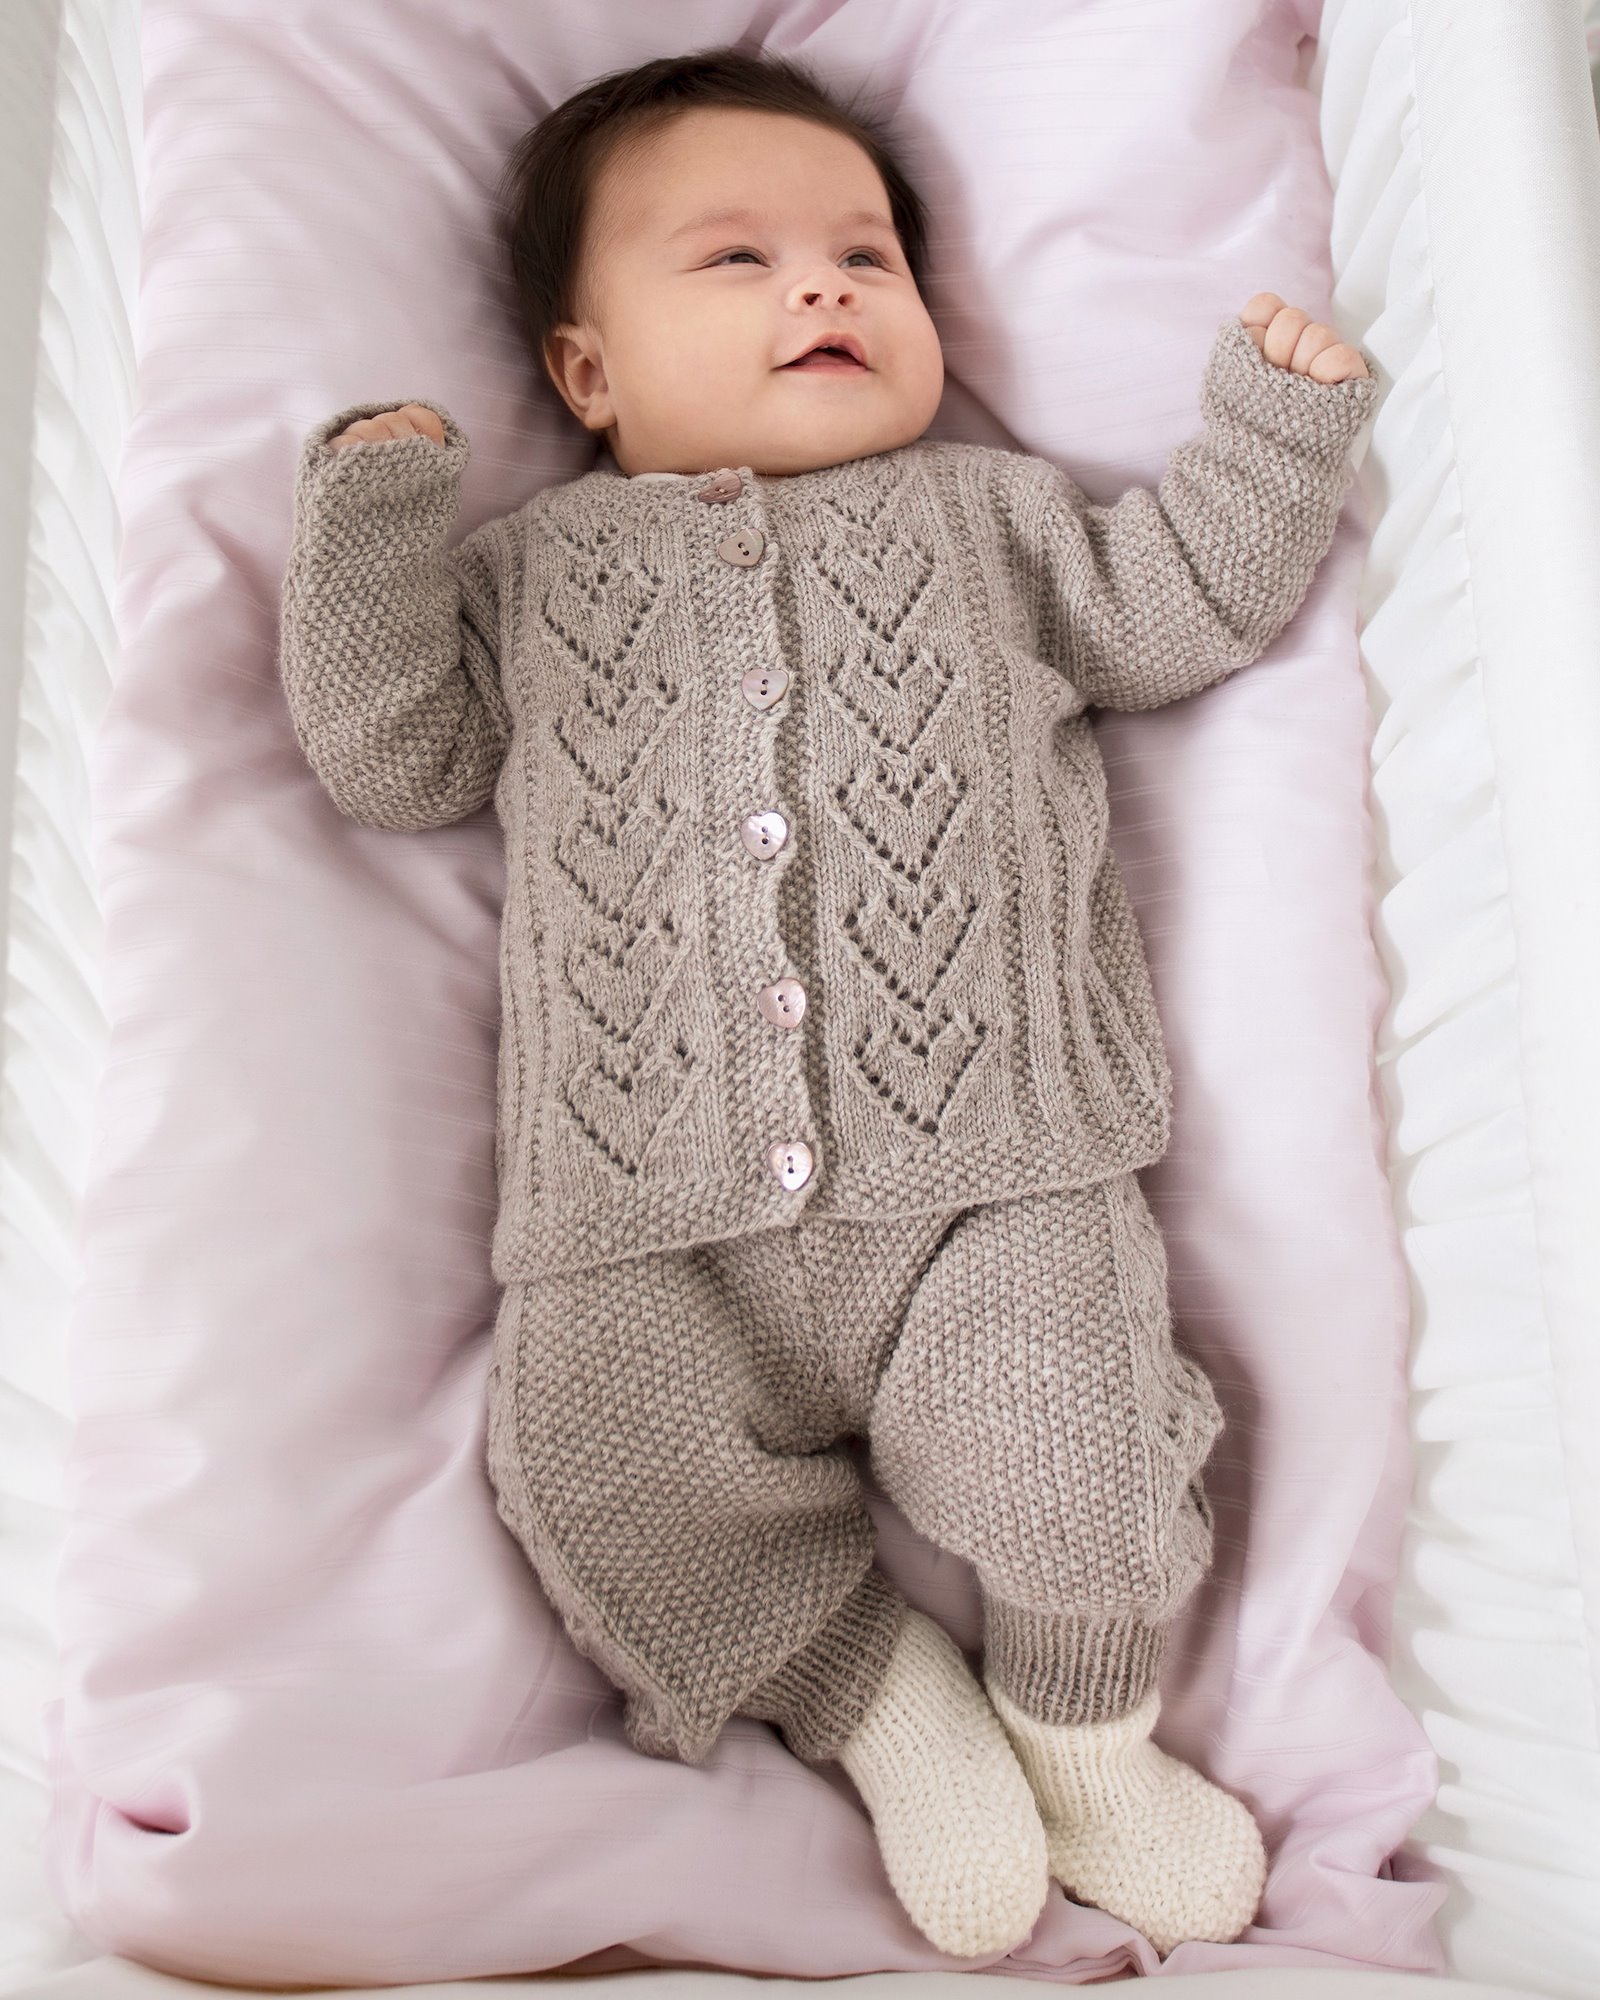 Dale Wolle, Strickanleitung: BABY-SET TRULS DALE6050_Truls_Baby_Set.jpg